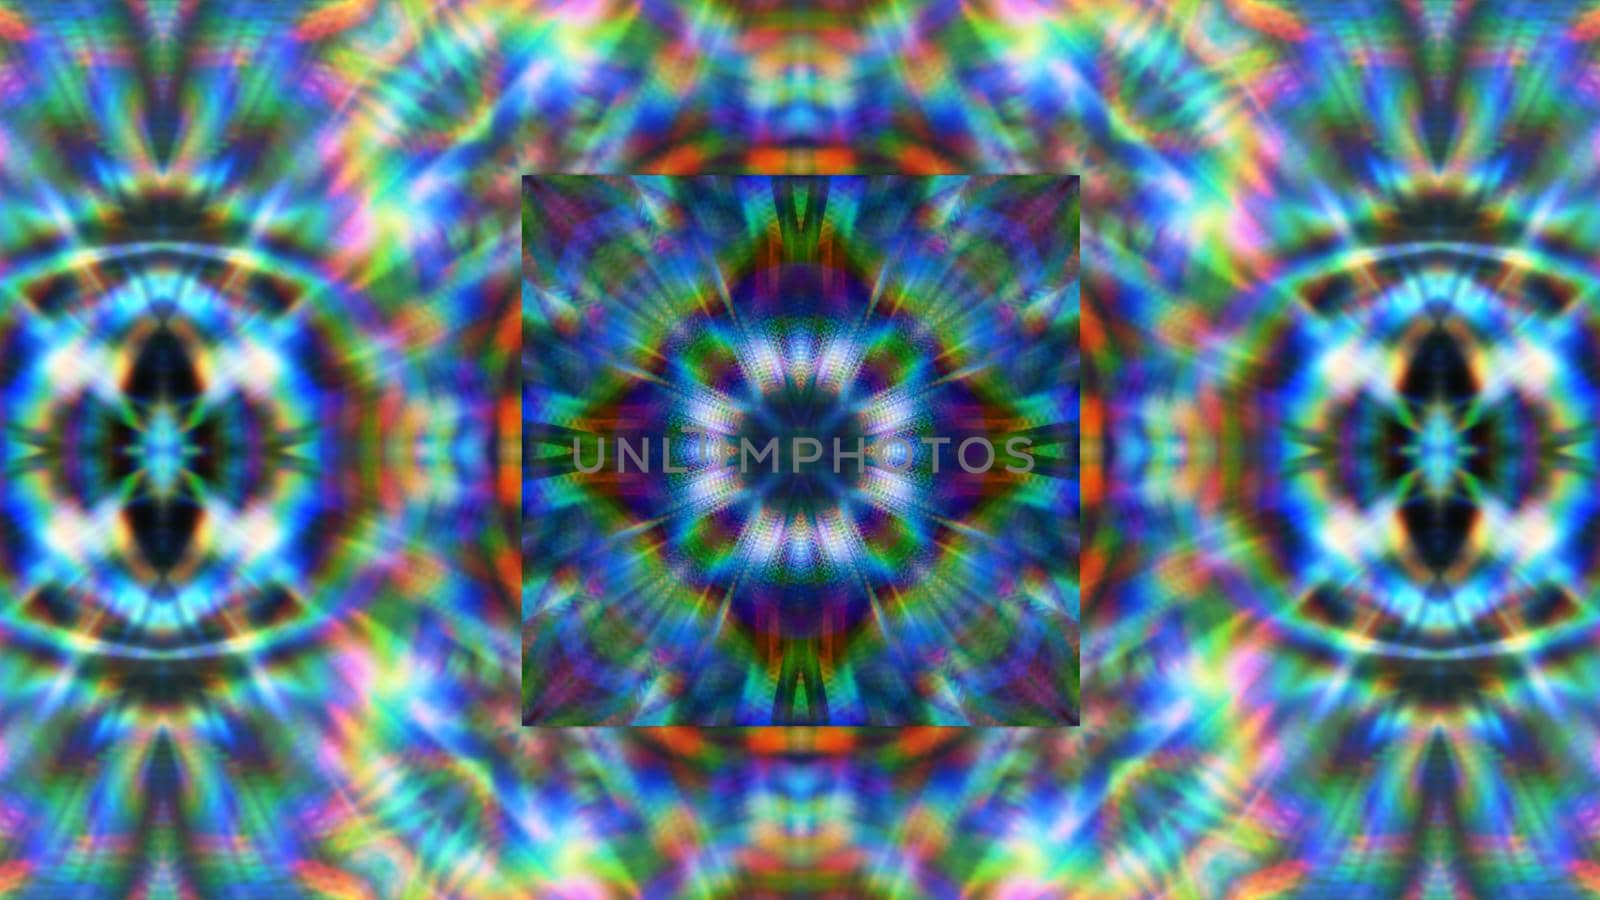 Abstract symmetrical background with an ornament and neon.